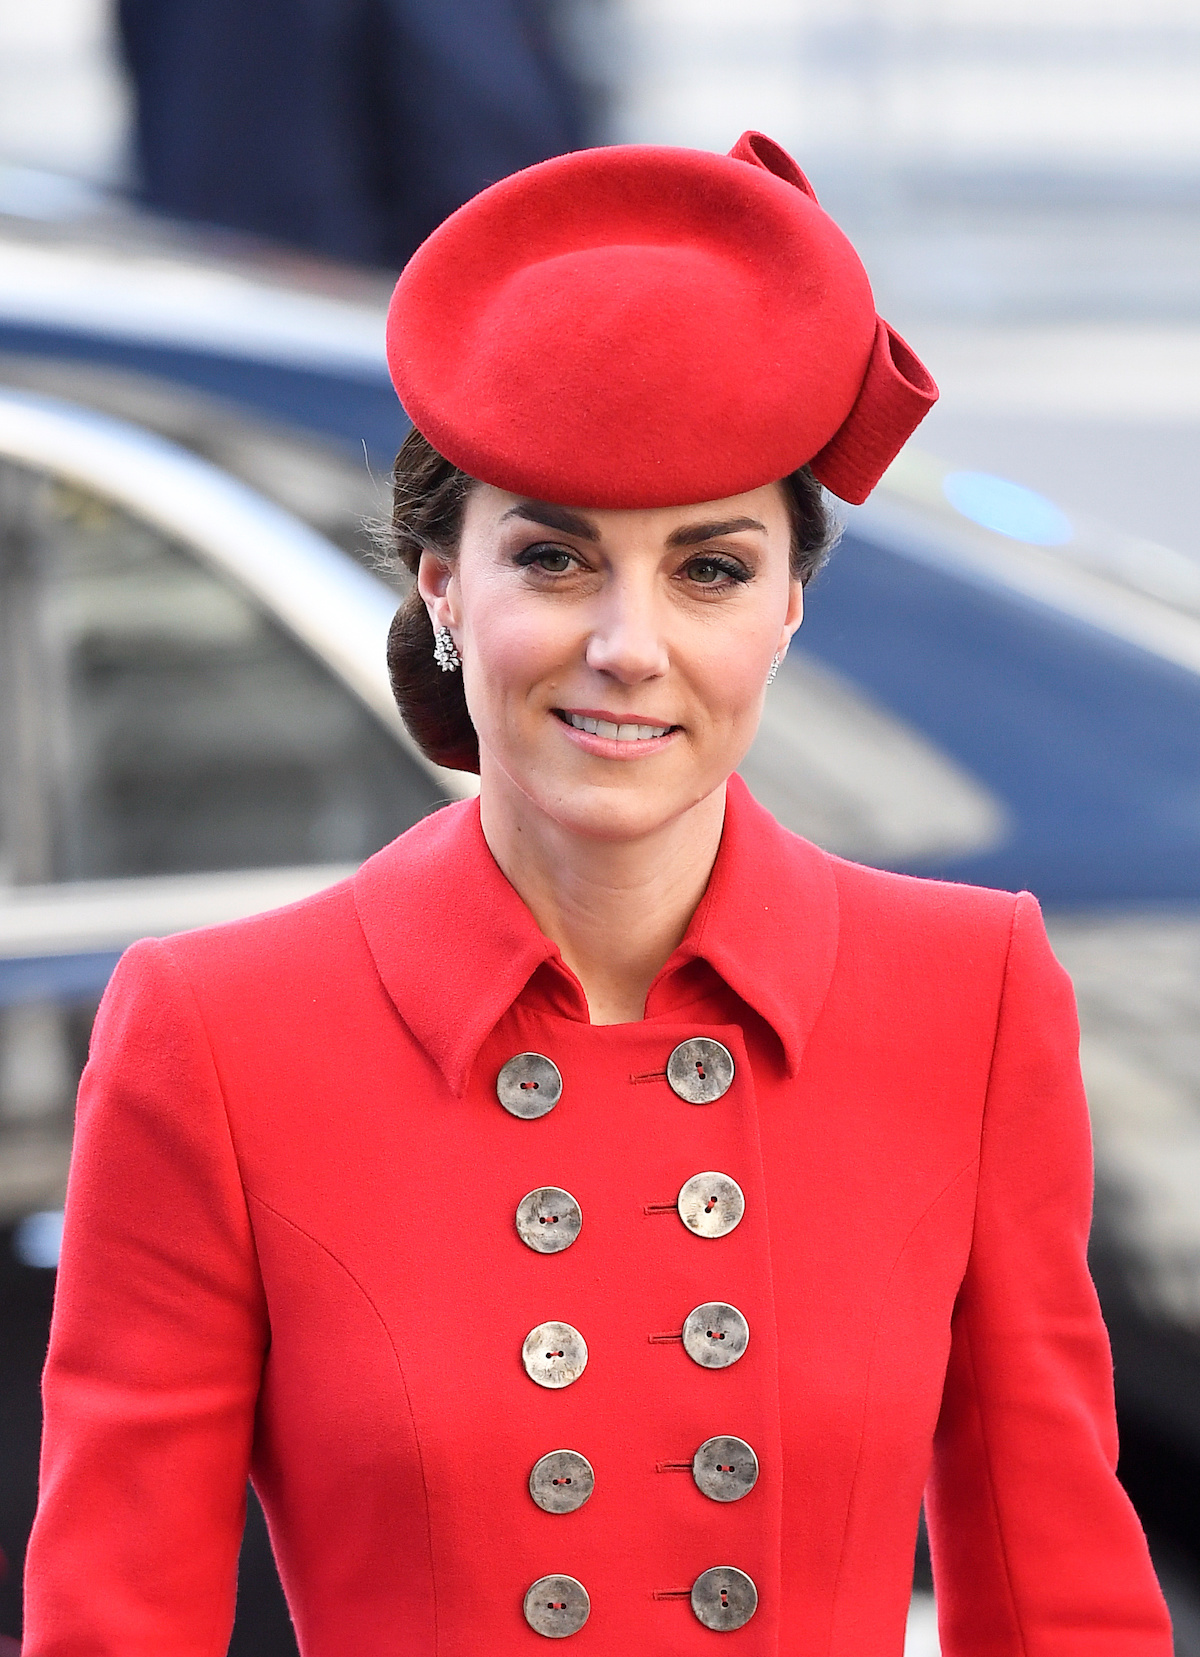 Catherine, Duchess of Cambridge arrives for the Commonwealth Service at Westminster Abbey, on Commonwealth Day, in London, Britain March 11, 2019. REUTERS/Toby Melville